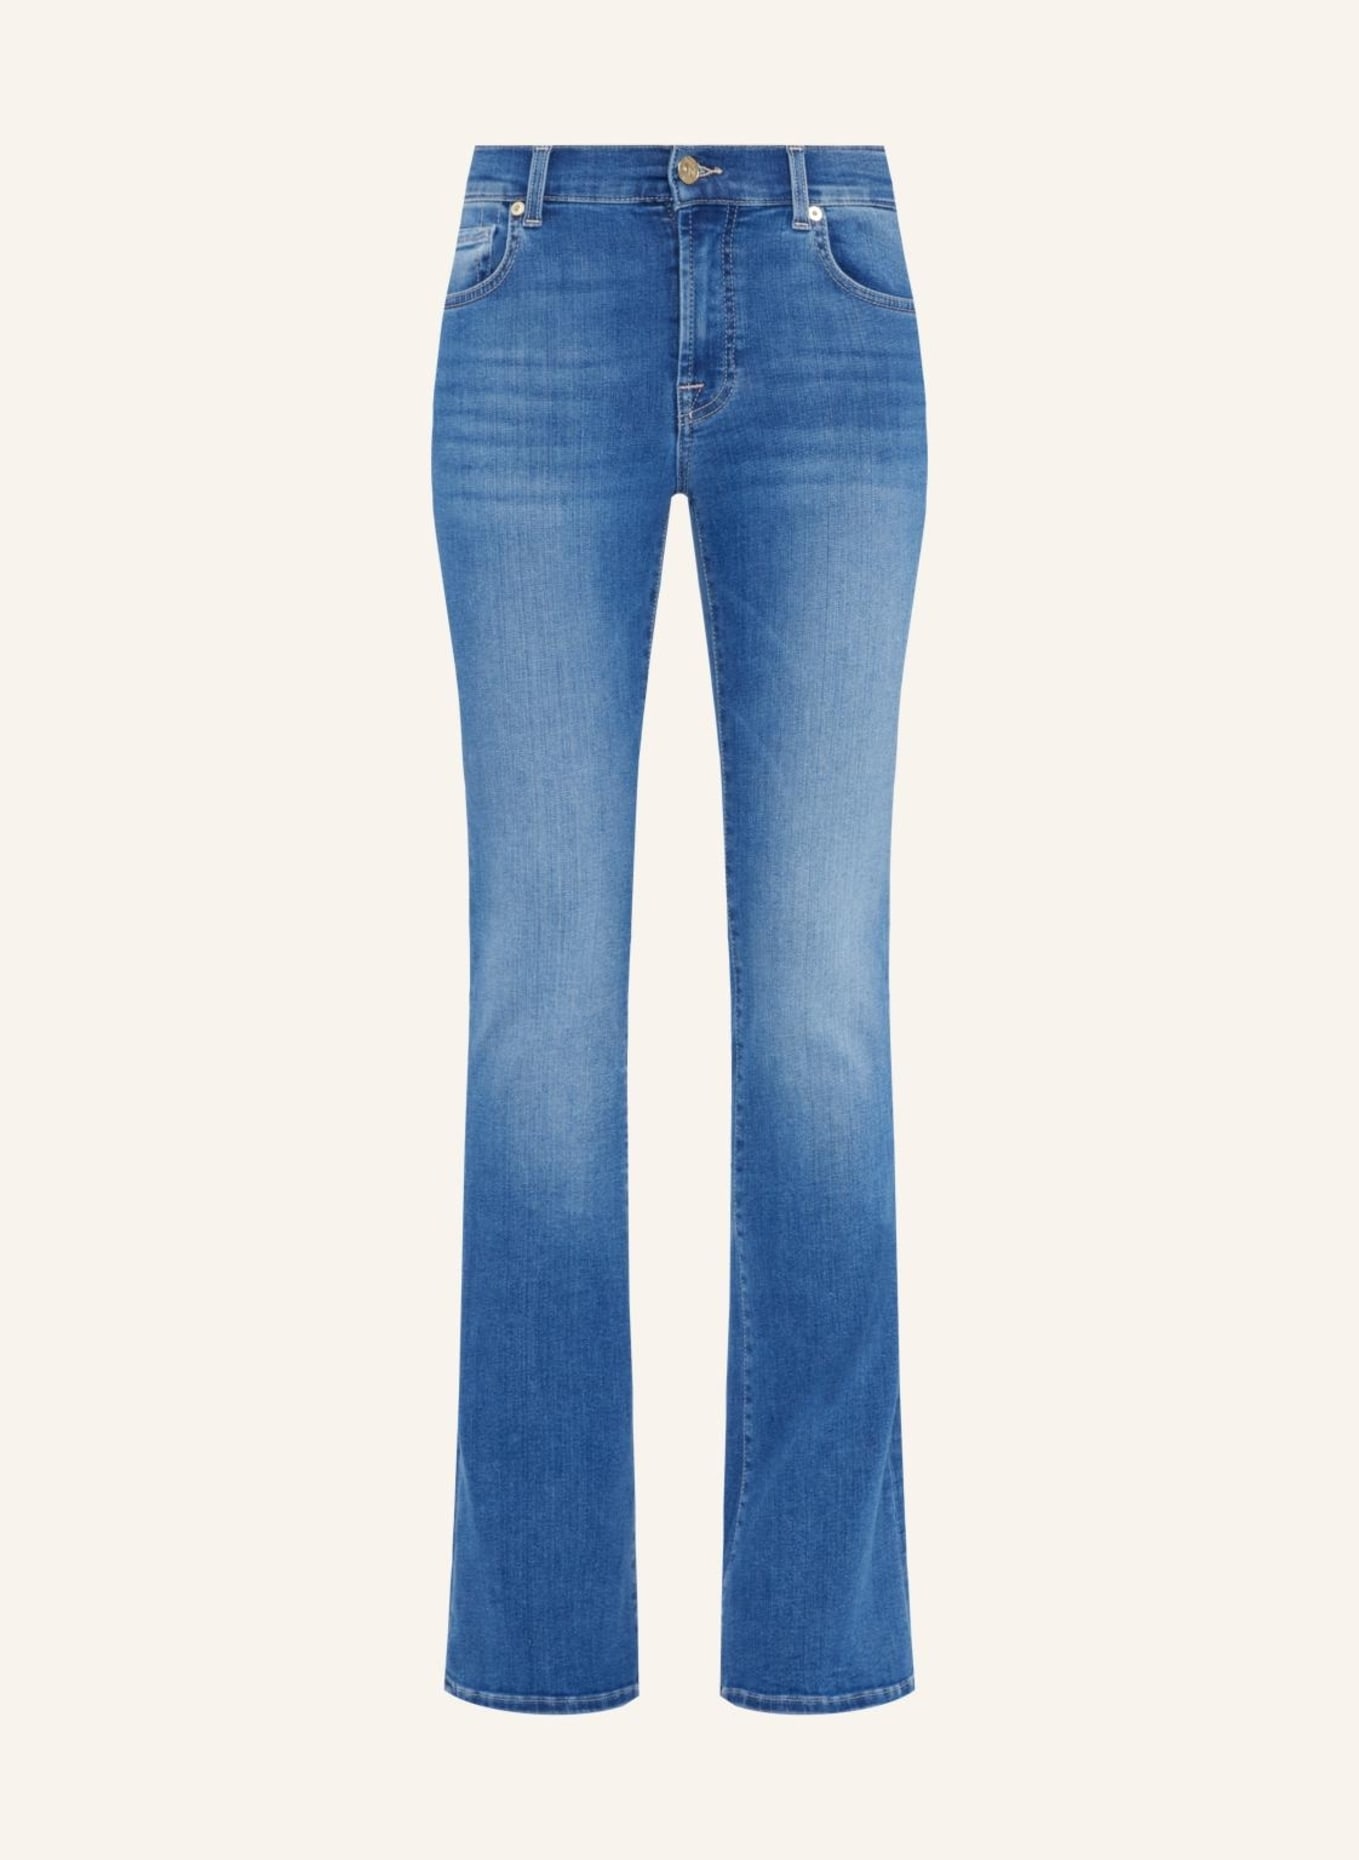 7 for all mankind Jeans BOOTCUT Bootcut fit, Farbe: BLAU (Bild 1)